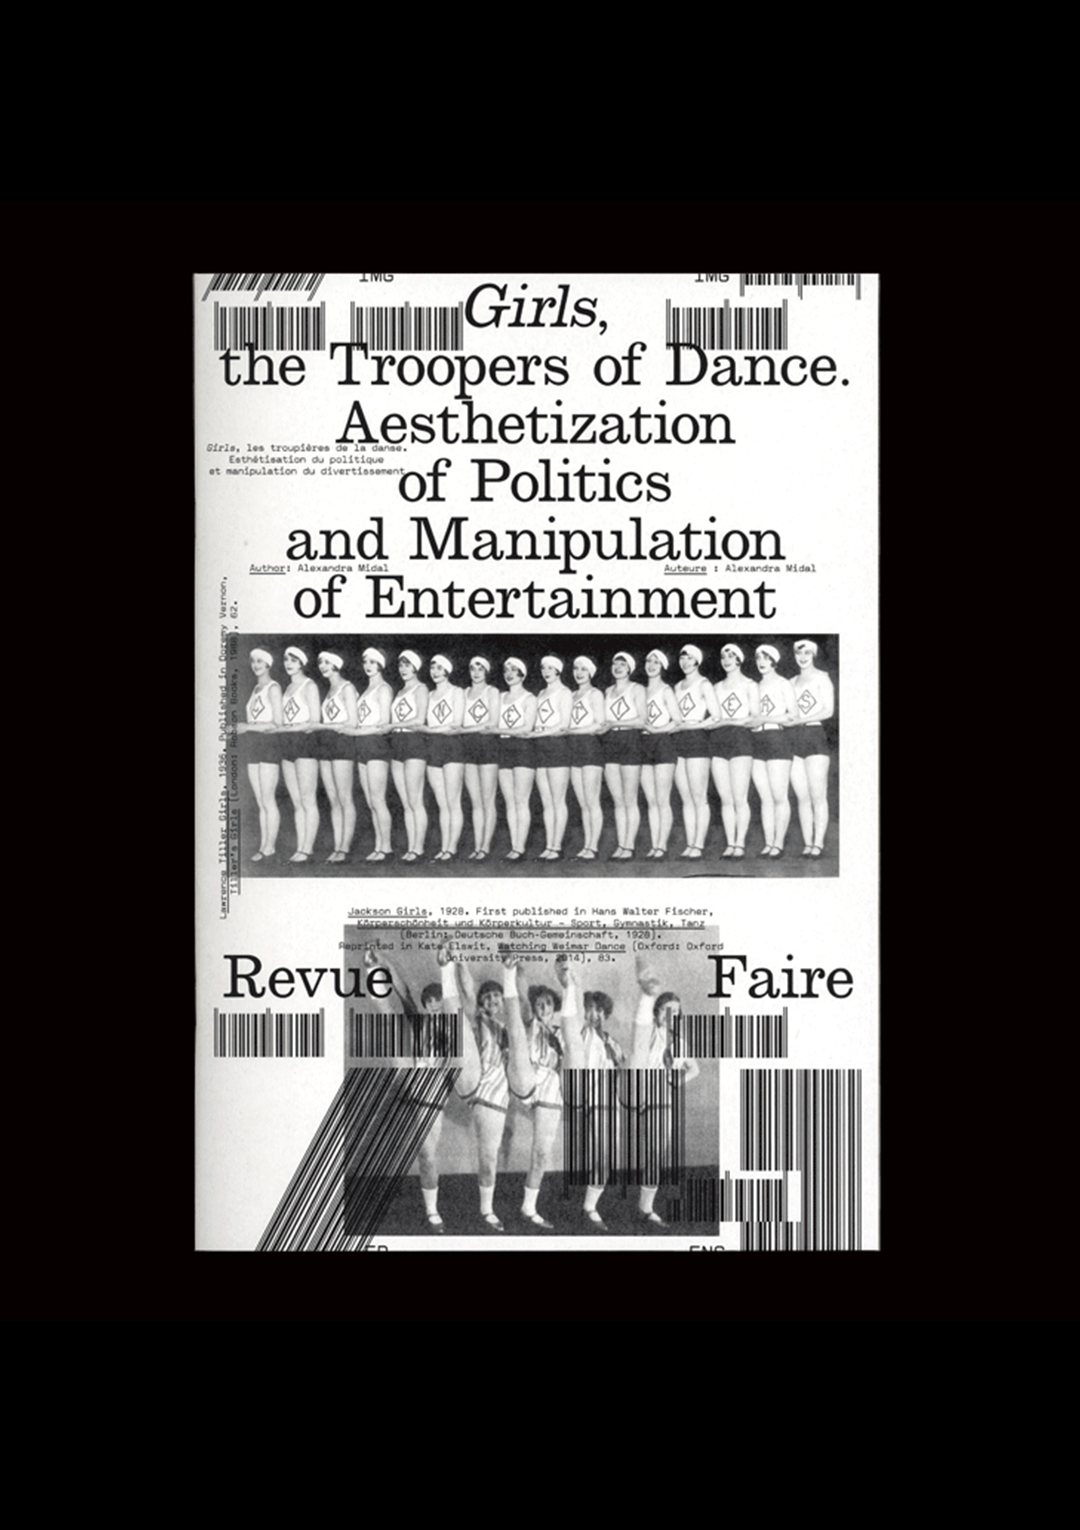 n°29 — Girls, the Troopers of Dance. Aesthetization of Politics and Manipulation of Entertainment.